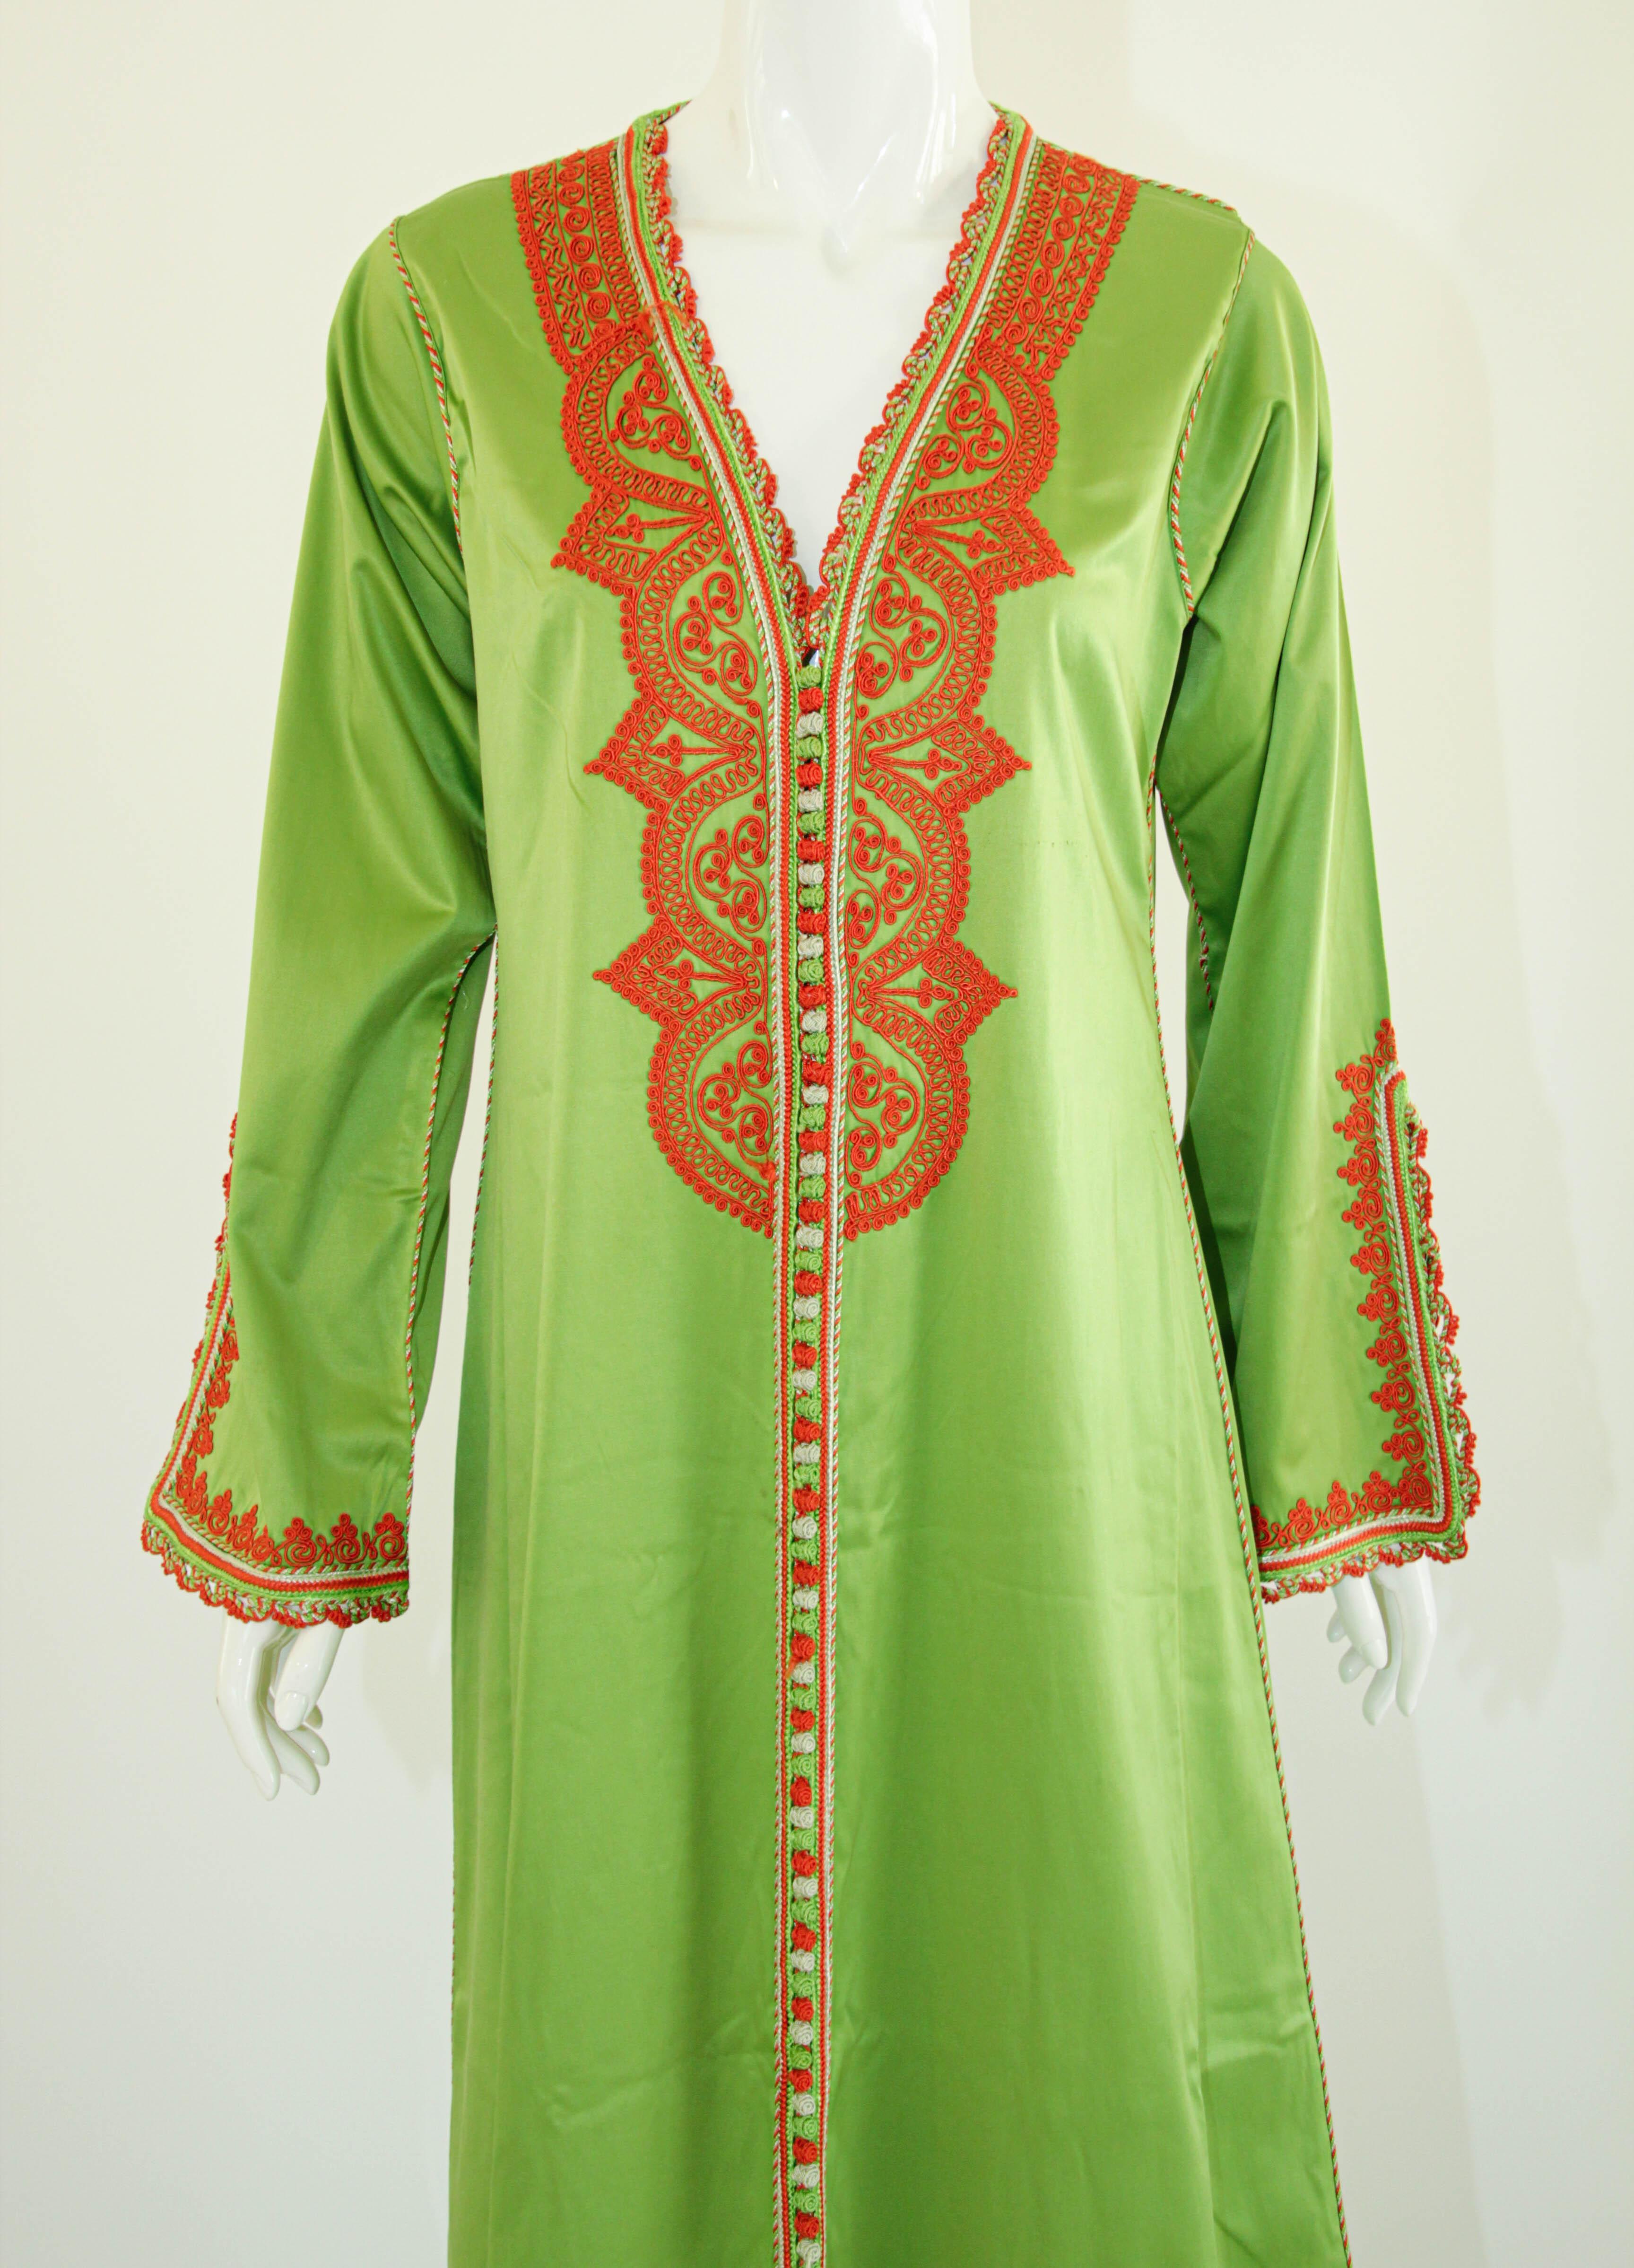 Elegant vintage Moroccan kaftan, embroidered with orange threads.
This chic Bohemian maxi dress kaftan, apple green satin is embroidered and embellished with handwoven thread trim. 
It is a slip on, the button does not open.
One of a kind custom